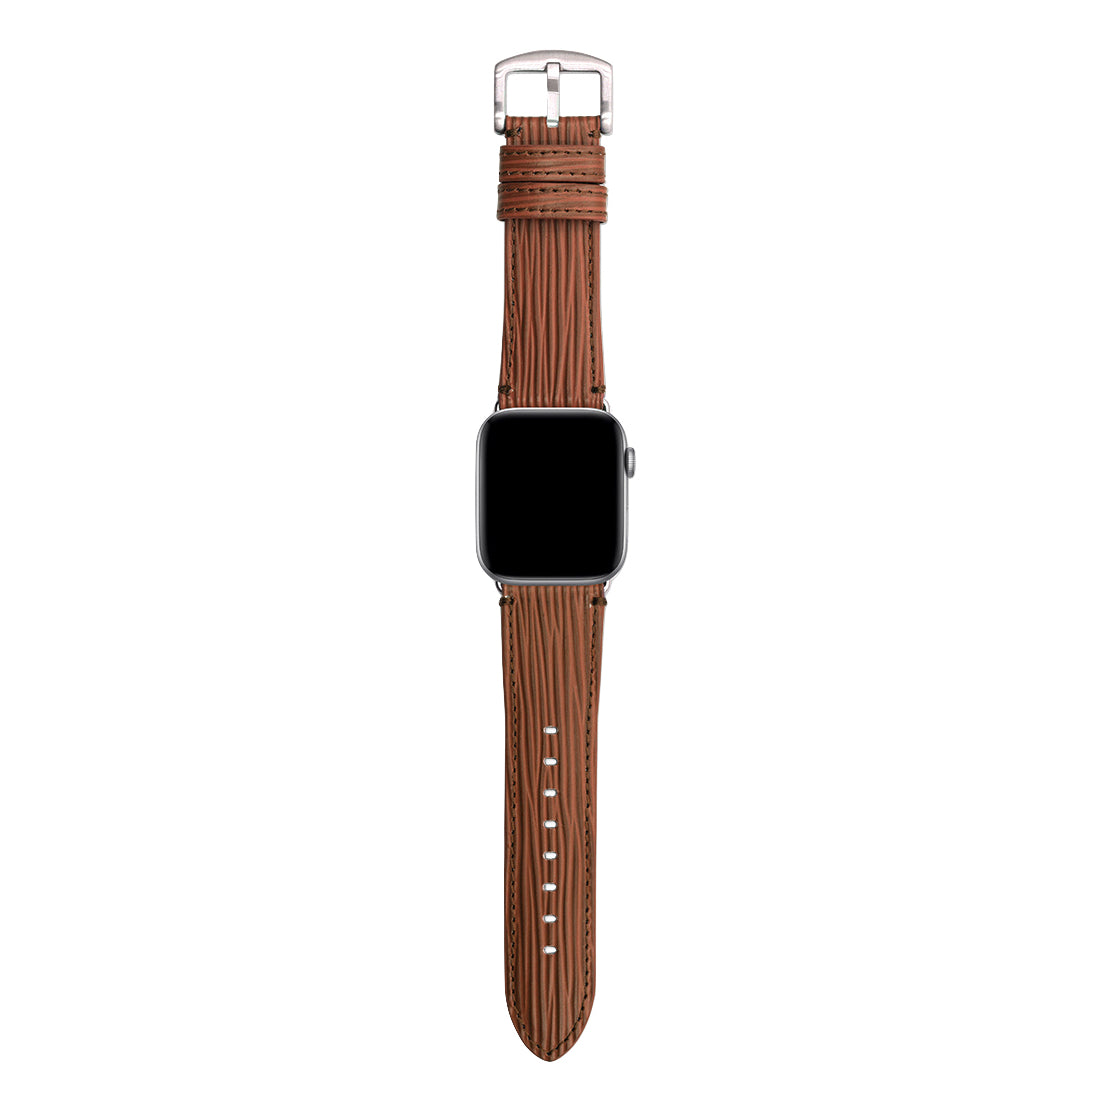 Genuine Leather Wave Pattern Handcrafted Apple Watch Band-Watch Band- phone case - phone cases- phone cover- iphone cover- iphone case- iphone cases- leather case- leather cases- DIYCASE - custom case - leather cover - hand strap case - croco pattern case - snake pattern case - carbon fiber phone case - phone case brand - unique phone case - high quality - phone case brand - protective case - buy phone case hong kong - online buy phone case - iphone‎手機殼 - 客製化手機殼 - samsung ‎手機殼 - 香港手機殼 - 買電話殼